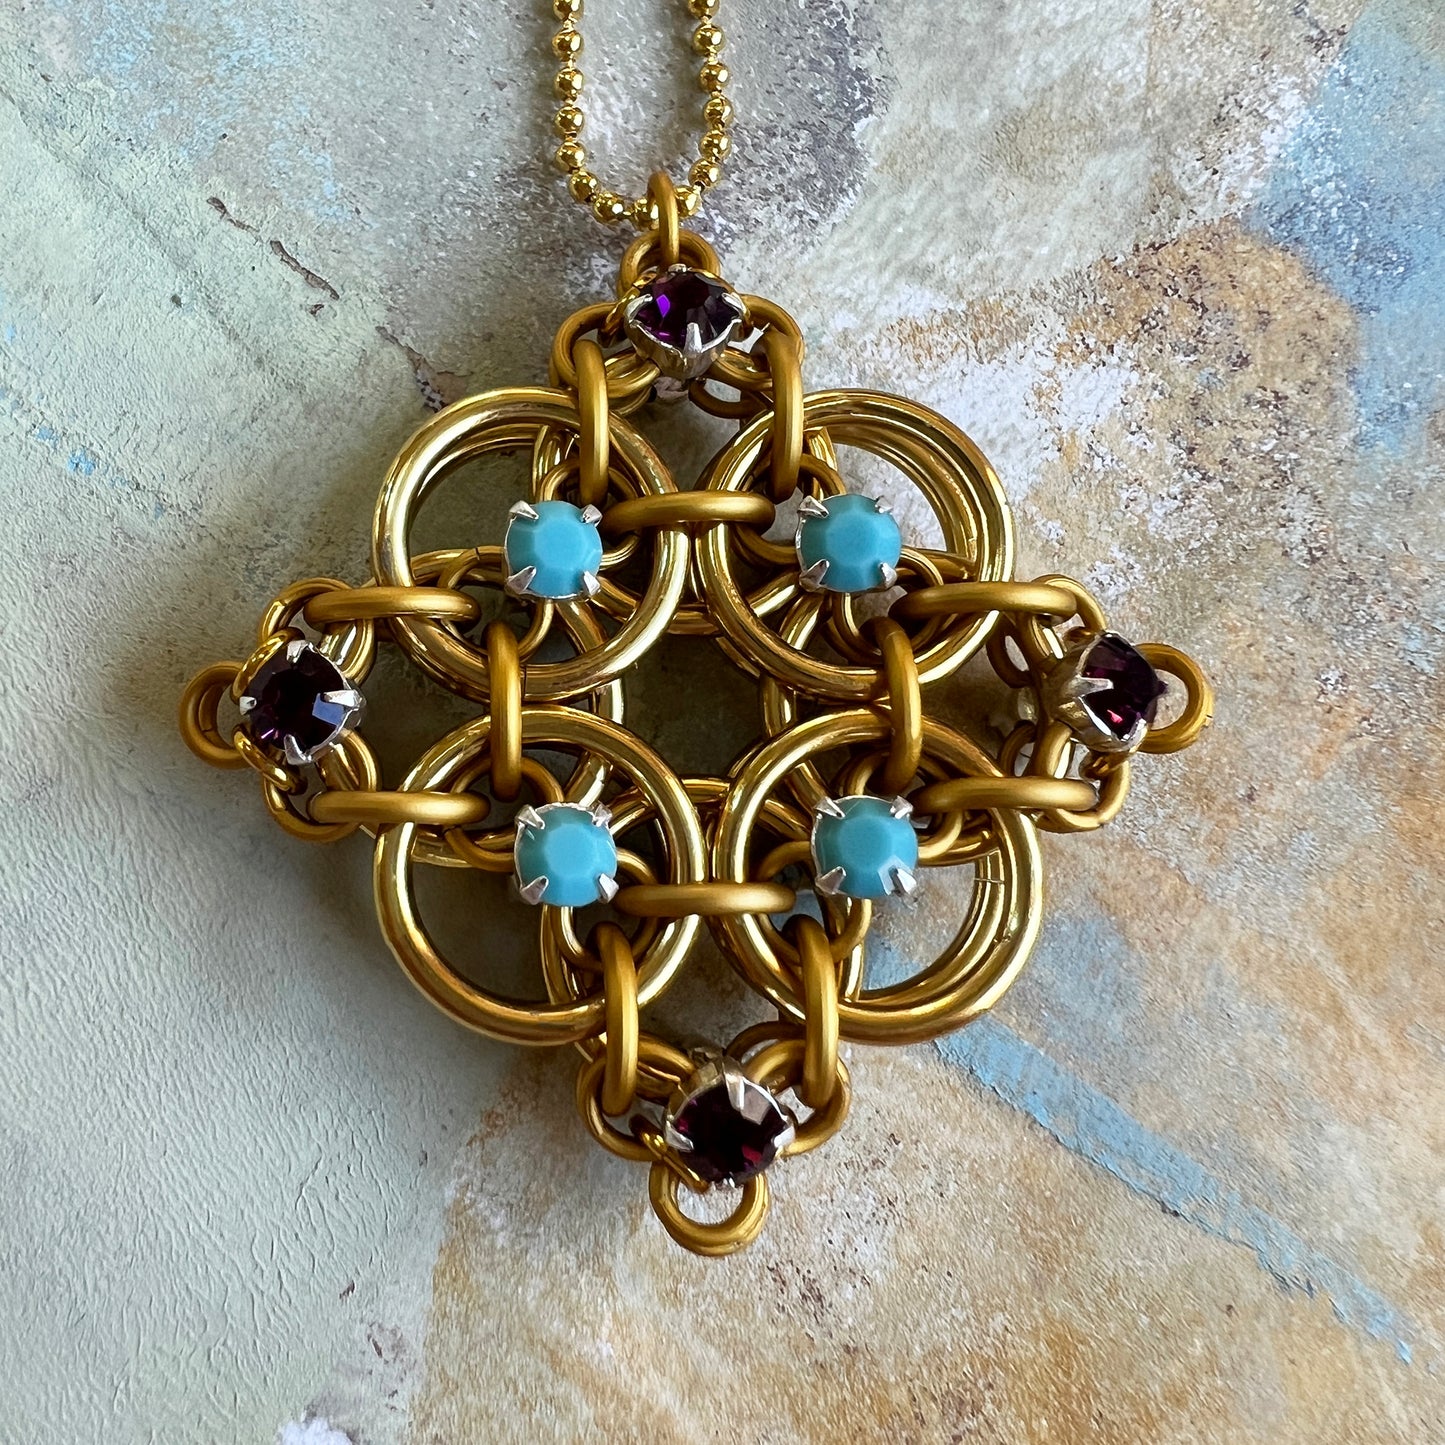 Helm Rhinestone Pendant Kit with Video Class - Gold, Op Turquoise and Amethyst